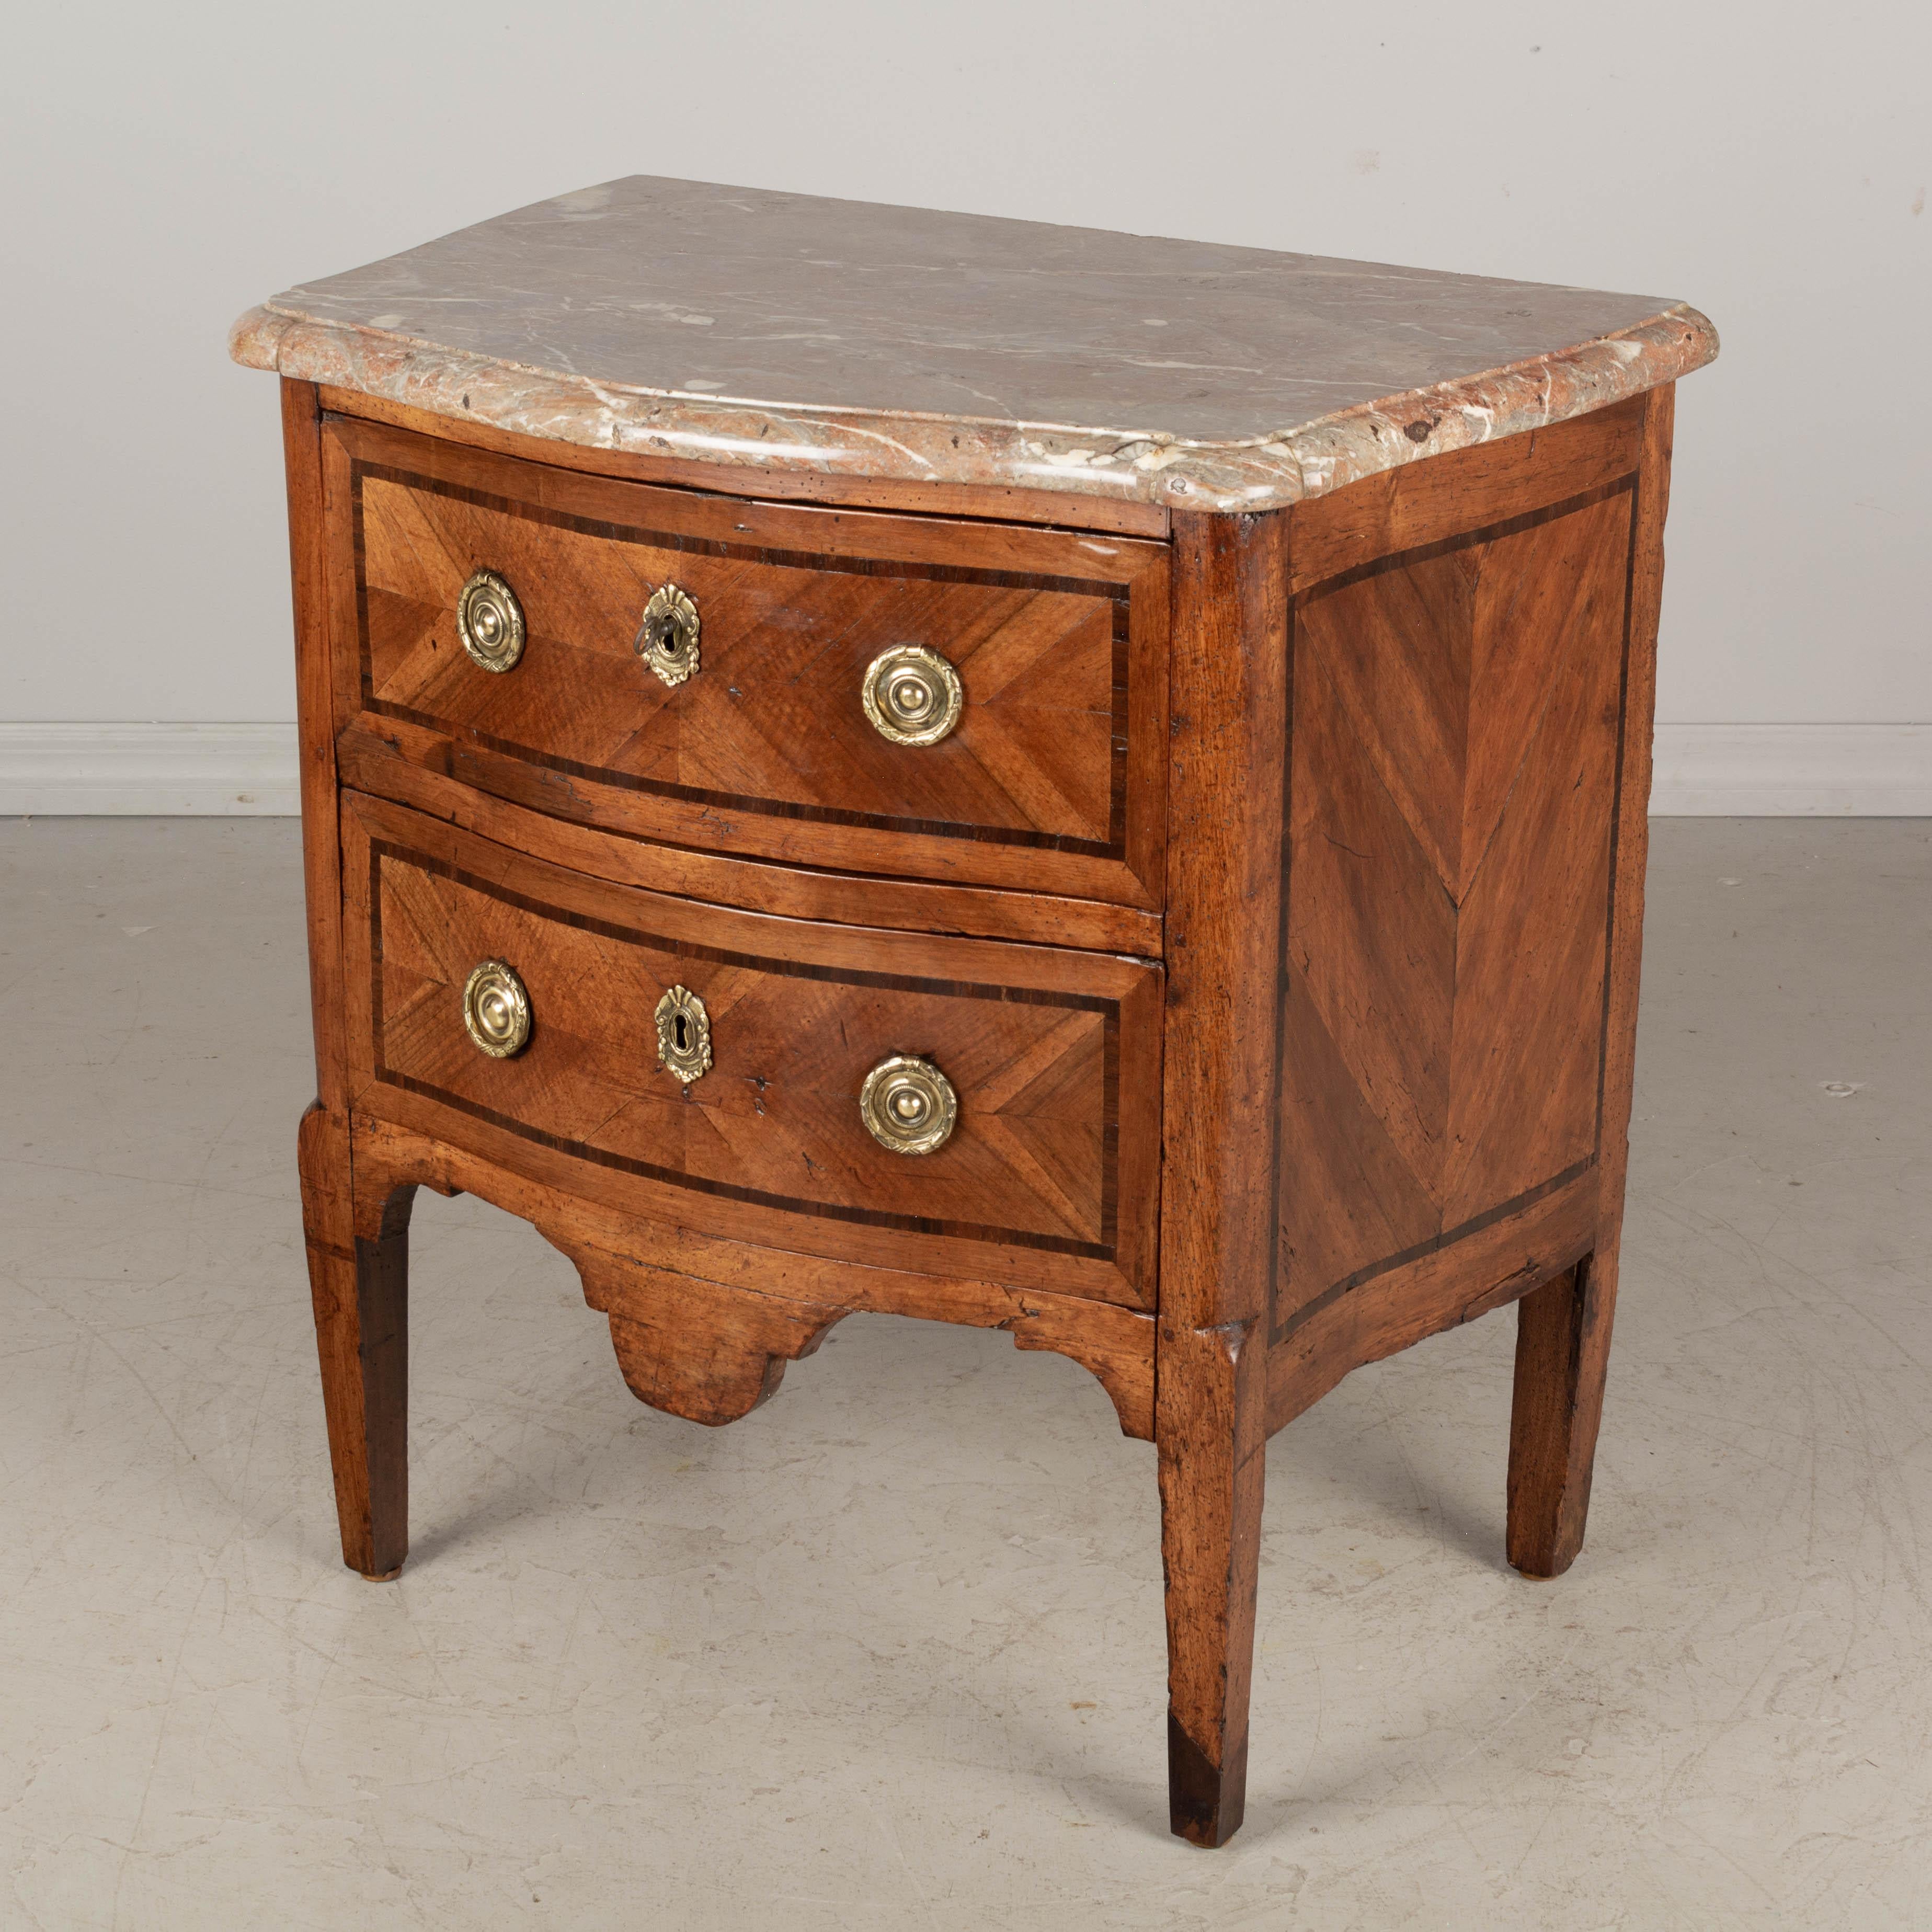 An 18th century French Louis XV style marble top serpentine front marquetry commode. Made of solid walnut with inlaid marquetry veneer of walnut. Original 1.25